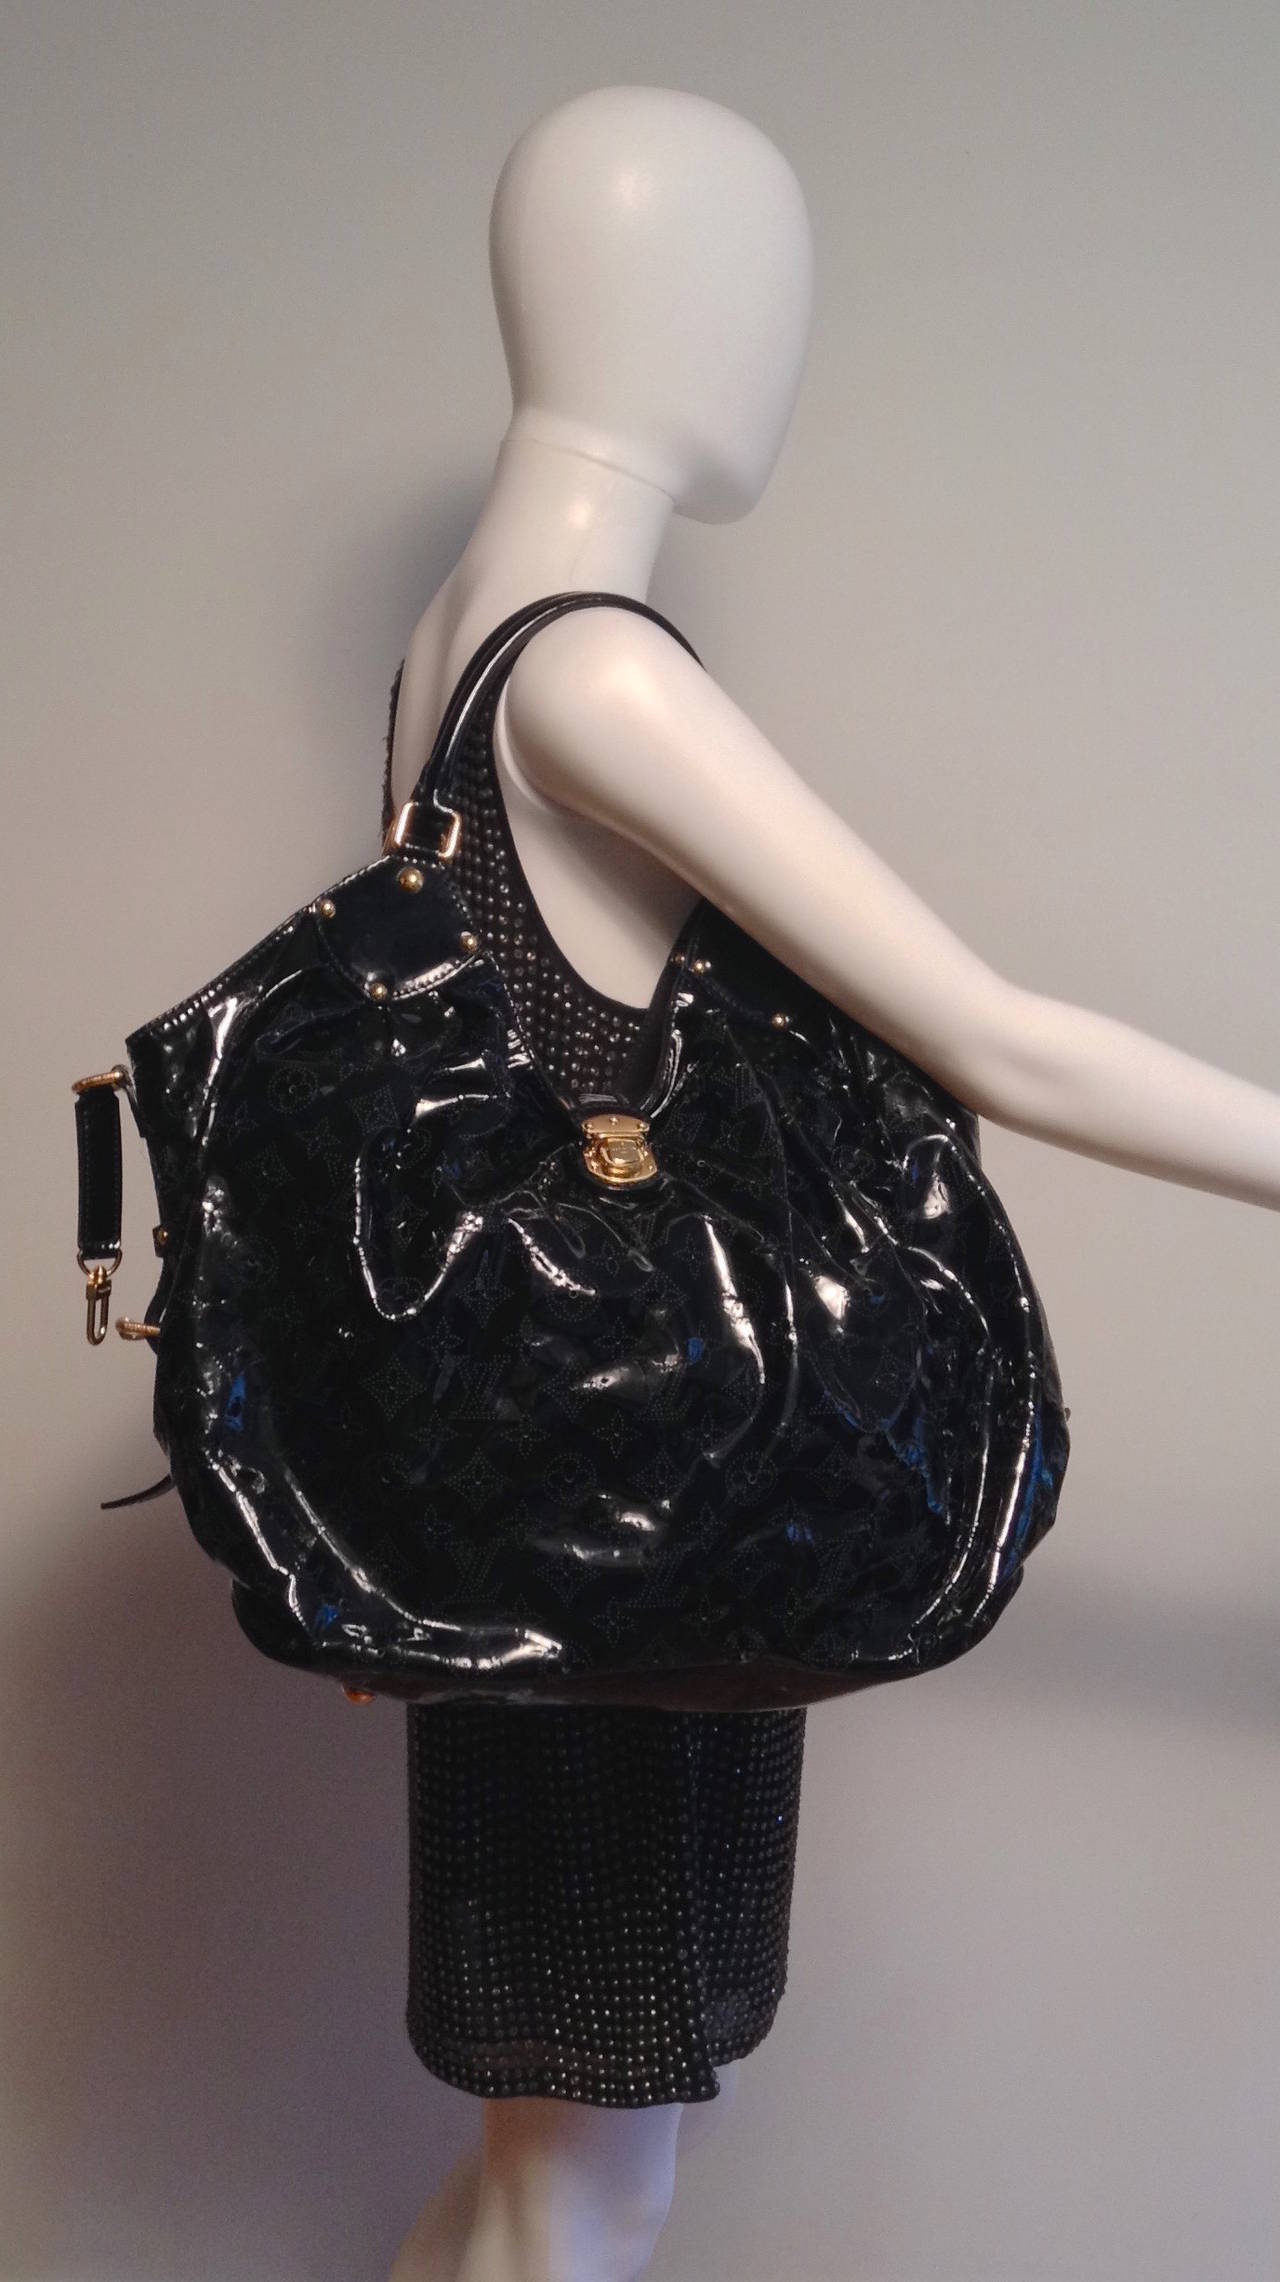 This is an authentic LOUIS VUITTON Surya Mahina XL in Black. This stunning shoulder bag is crafted of Mahina Louis Vuitton monogram perforated patent leather. The bag features rolled patent leather shoulder straps and brass links with a leather